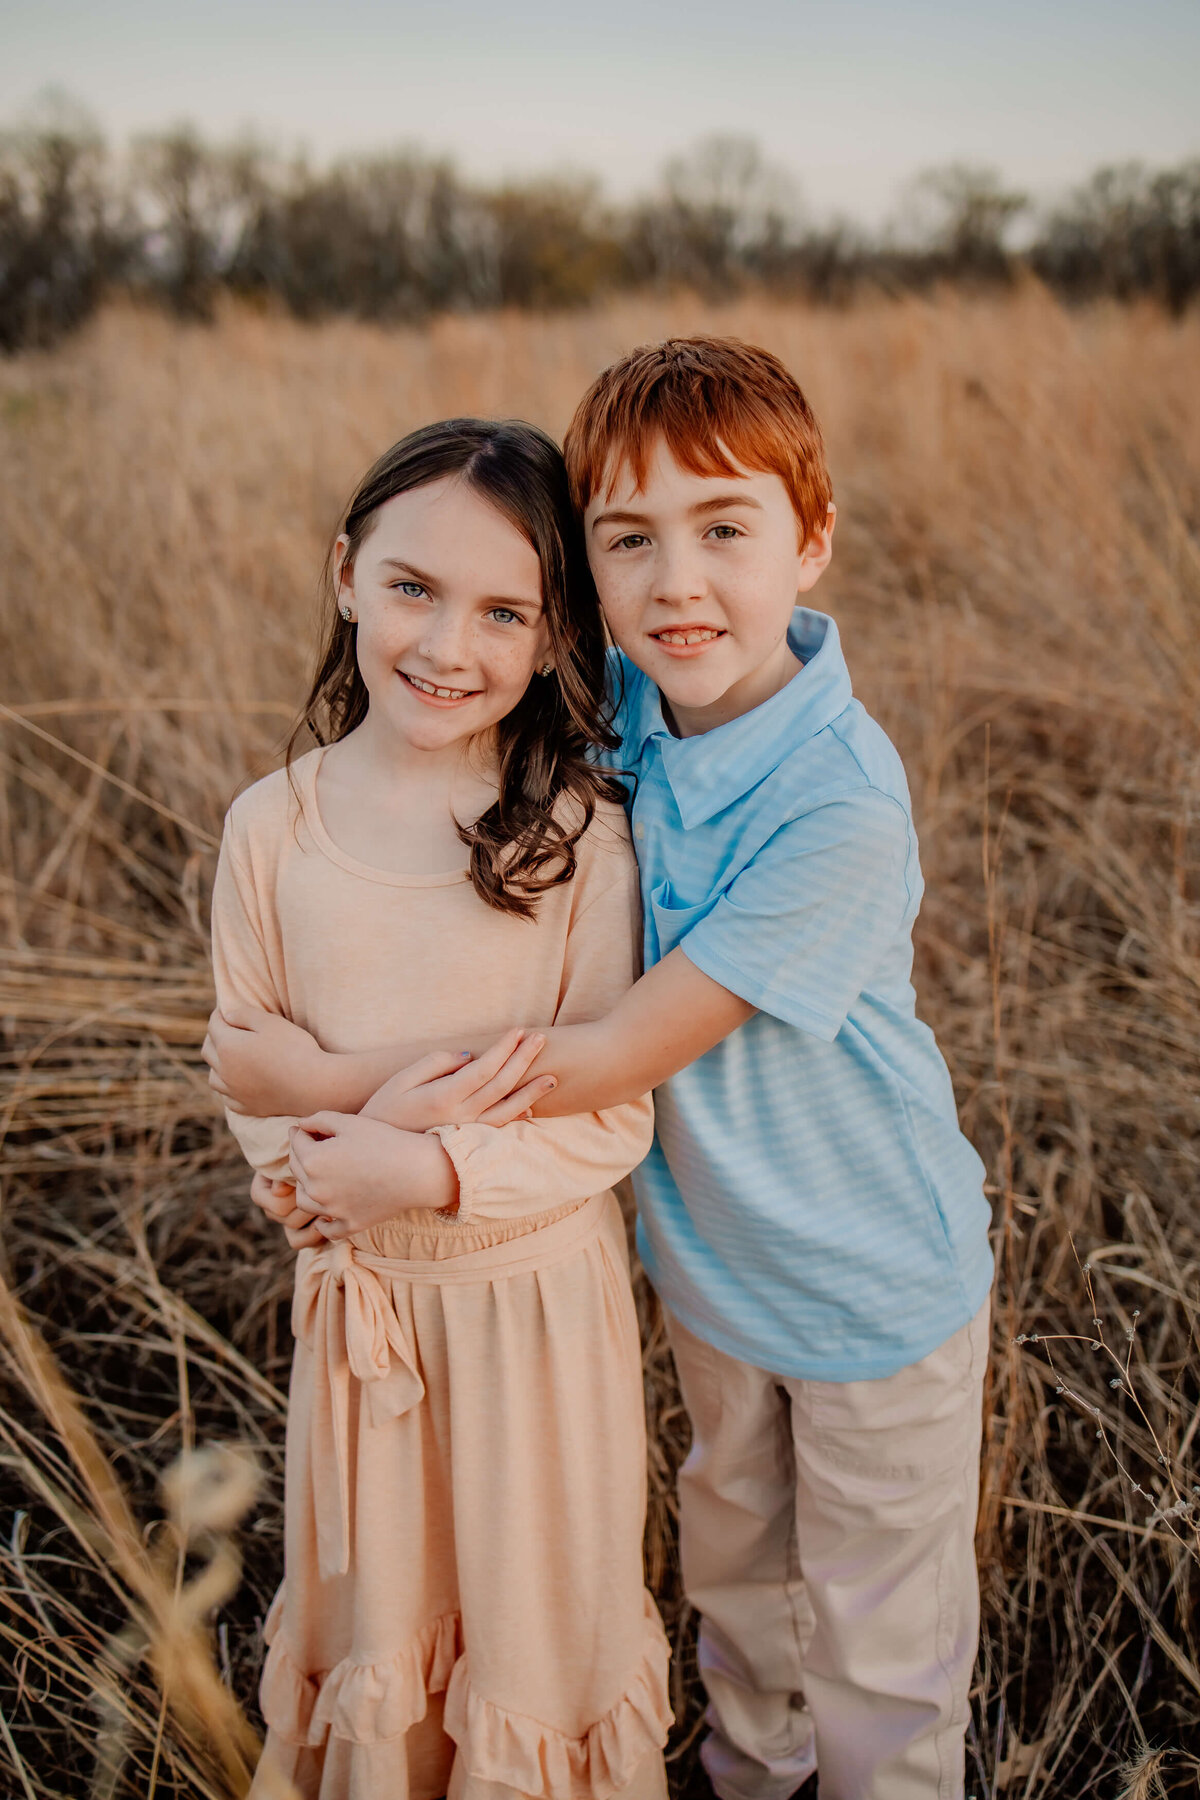 a red haired boy holding onto a brown hared girl both about 8 years old, standing in a field looking at the camera